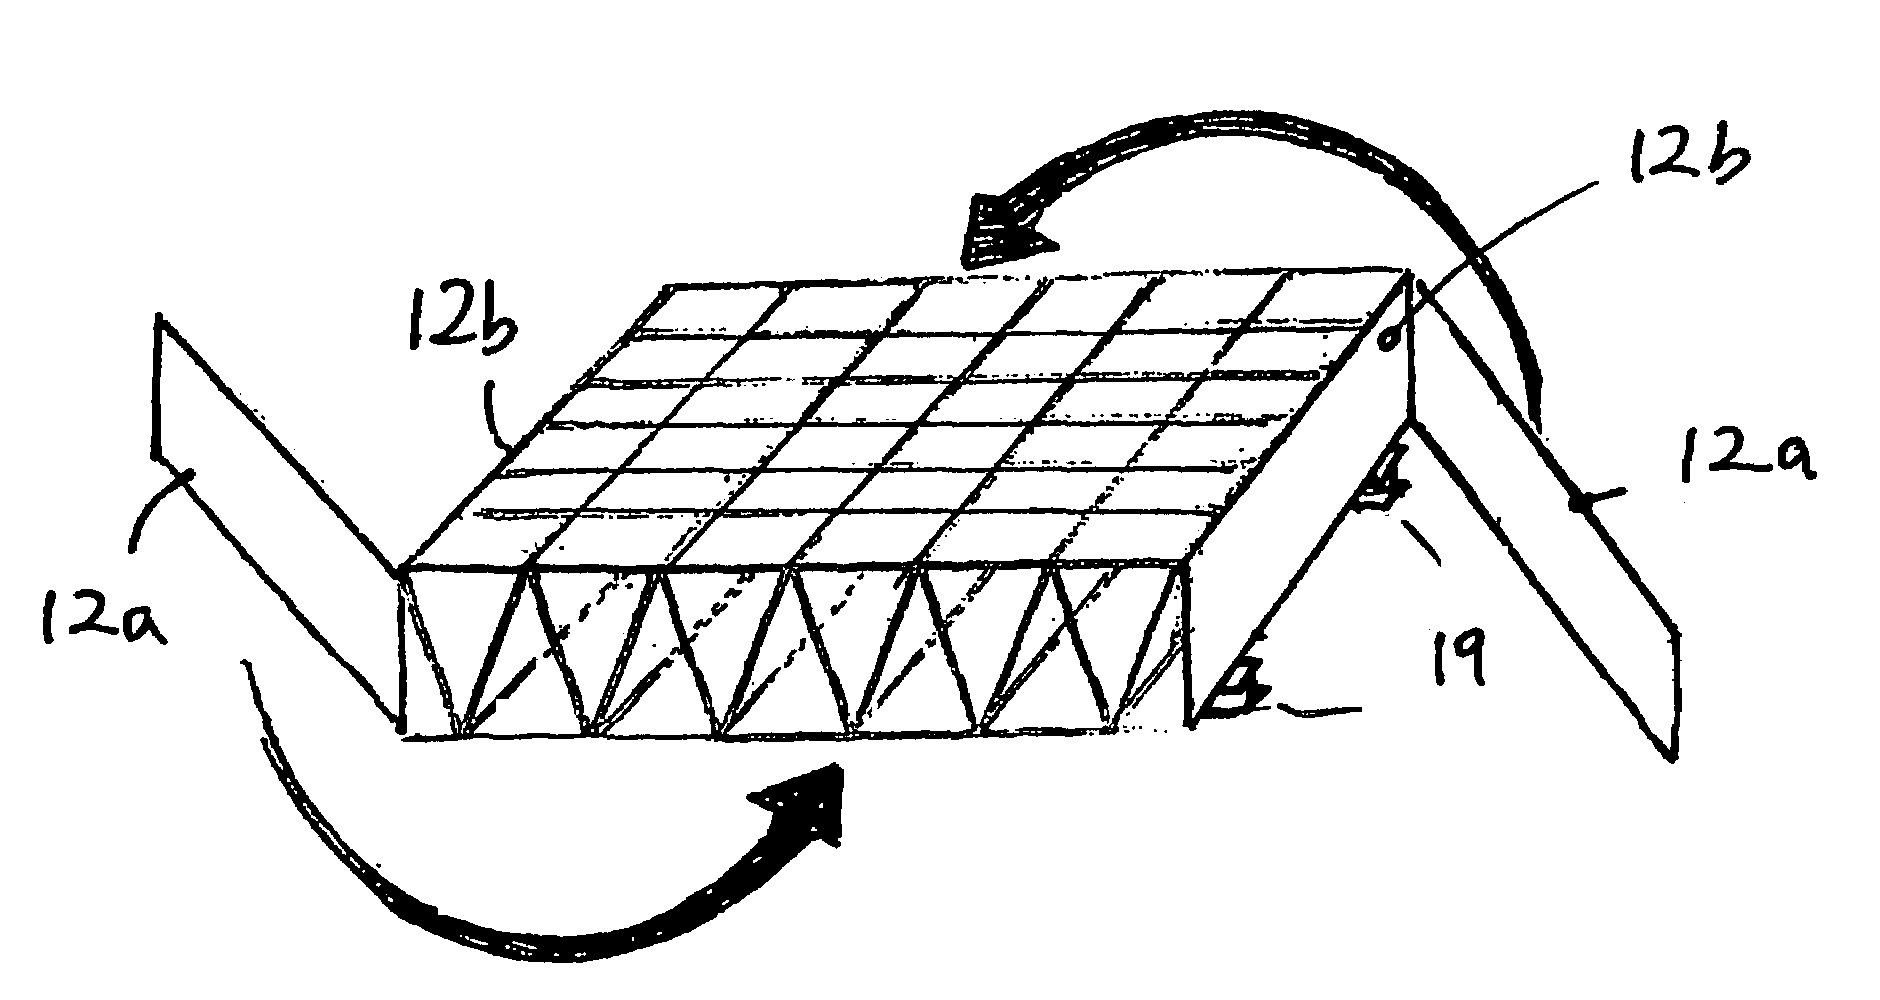 Solfire solar concentrator and pointer structure